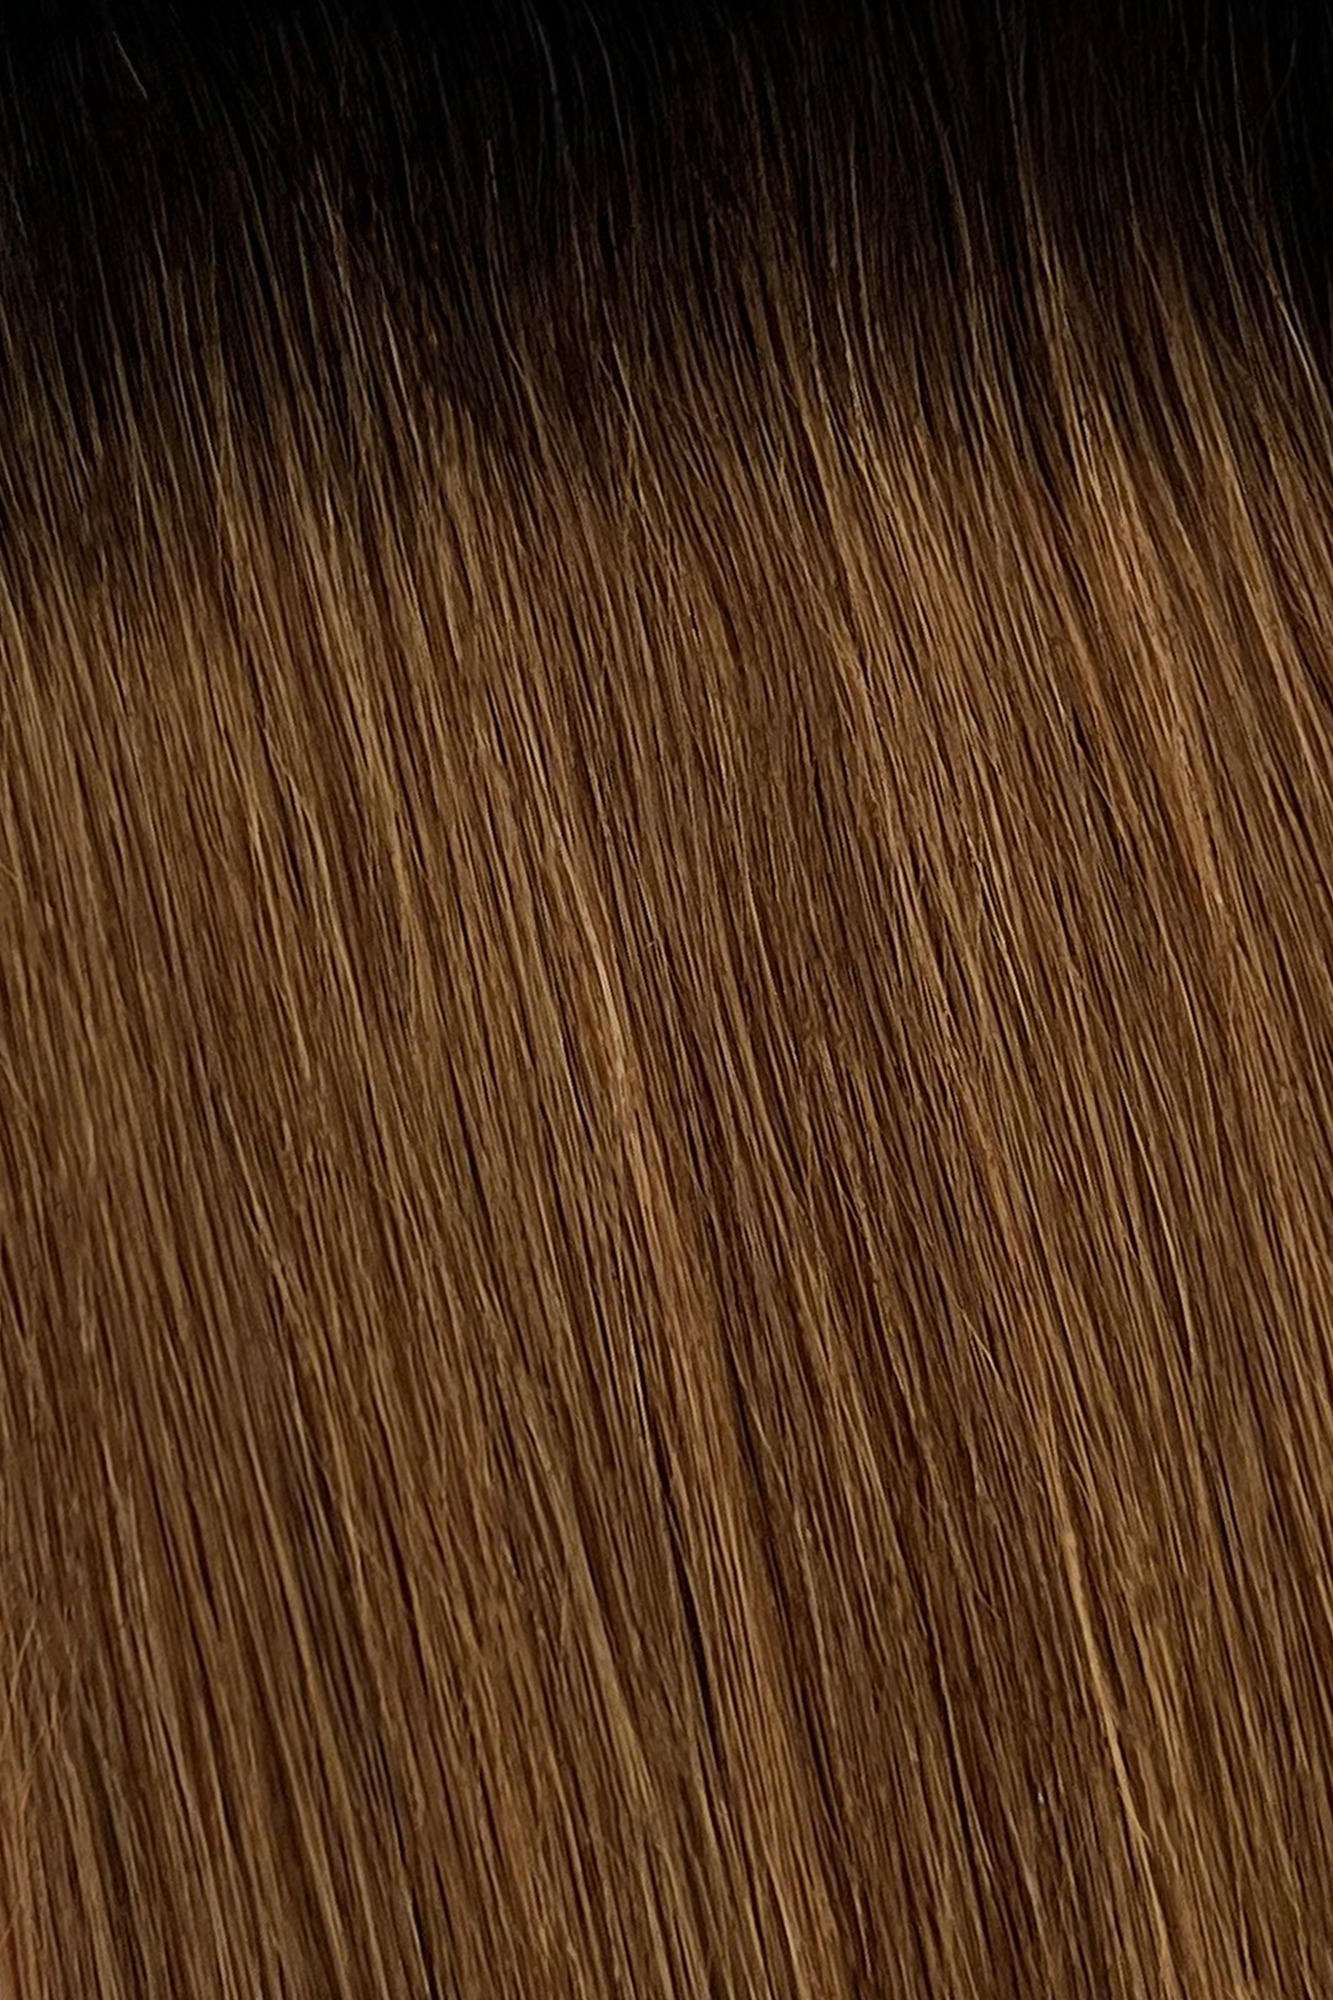 Nano Bonds 22 Inches - SWAY Hair Extensions Americano-R1B-4 Ultra-fine, invisible bonds for a flawless, natural look. 100% Remy Human hair, lightweight and versatile. Reusable and perfect for individual or salon use.